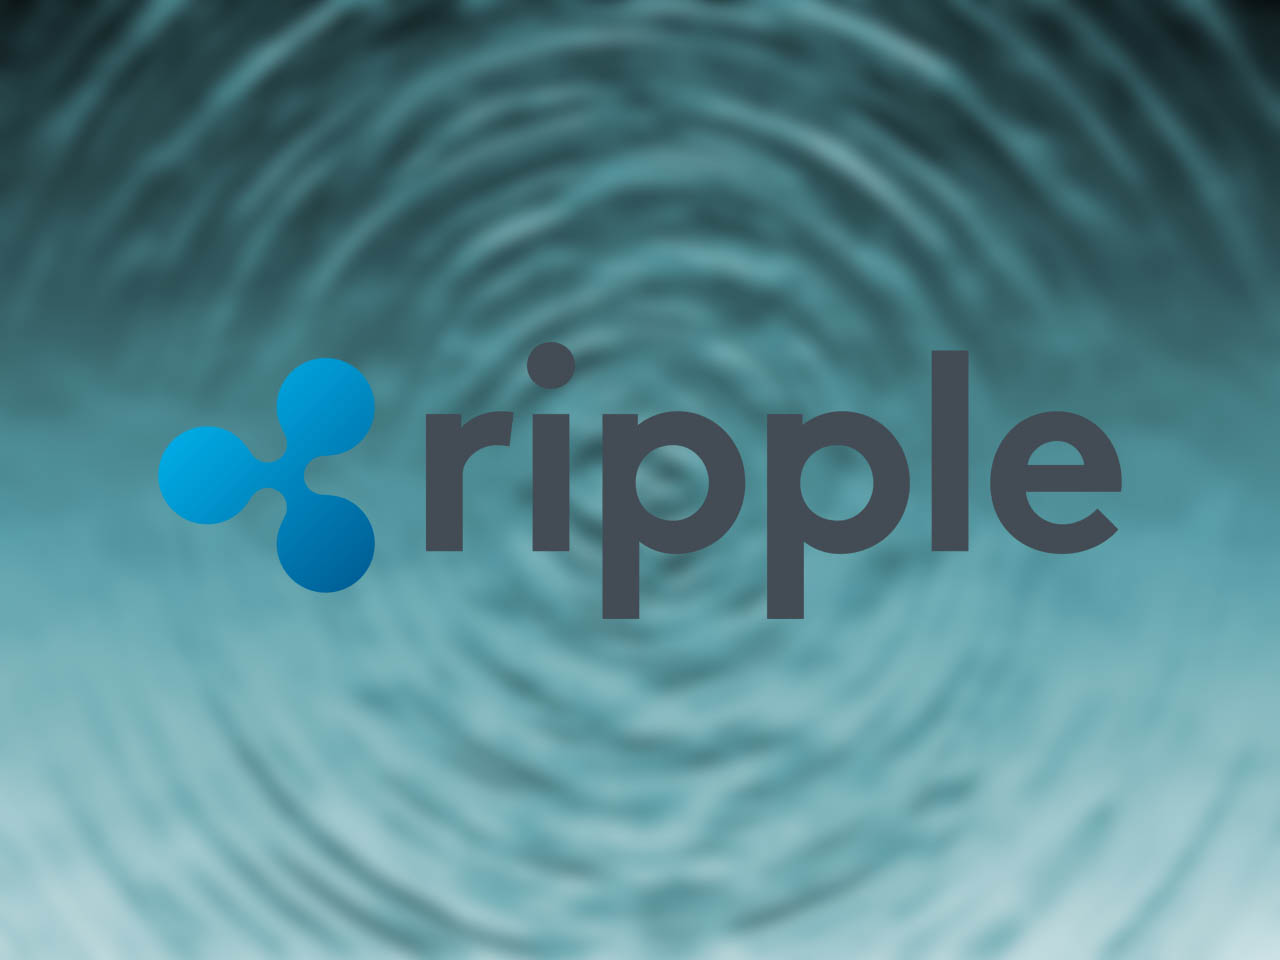 forbes dissect ripple as a pump and dump scam